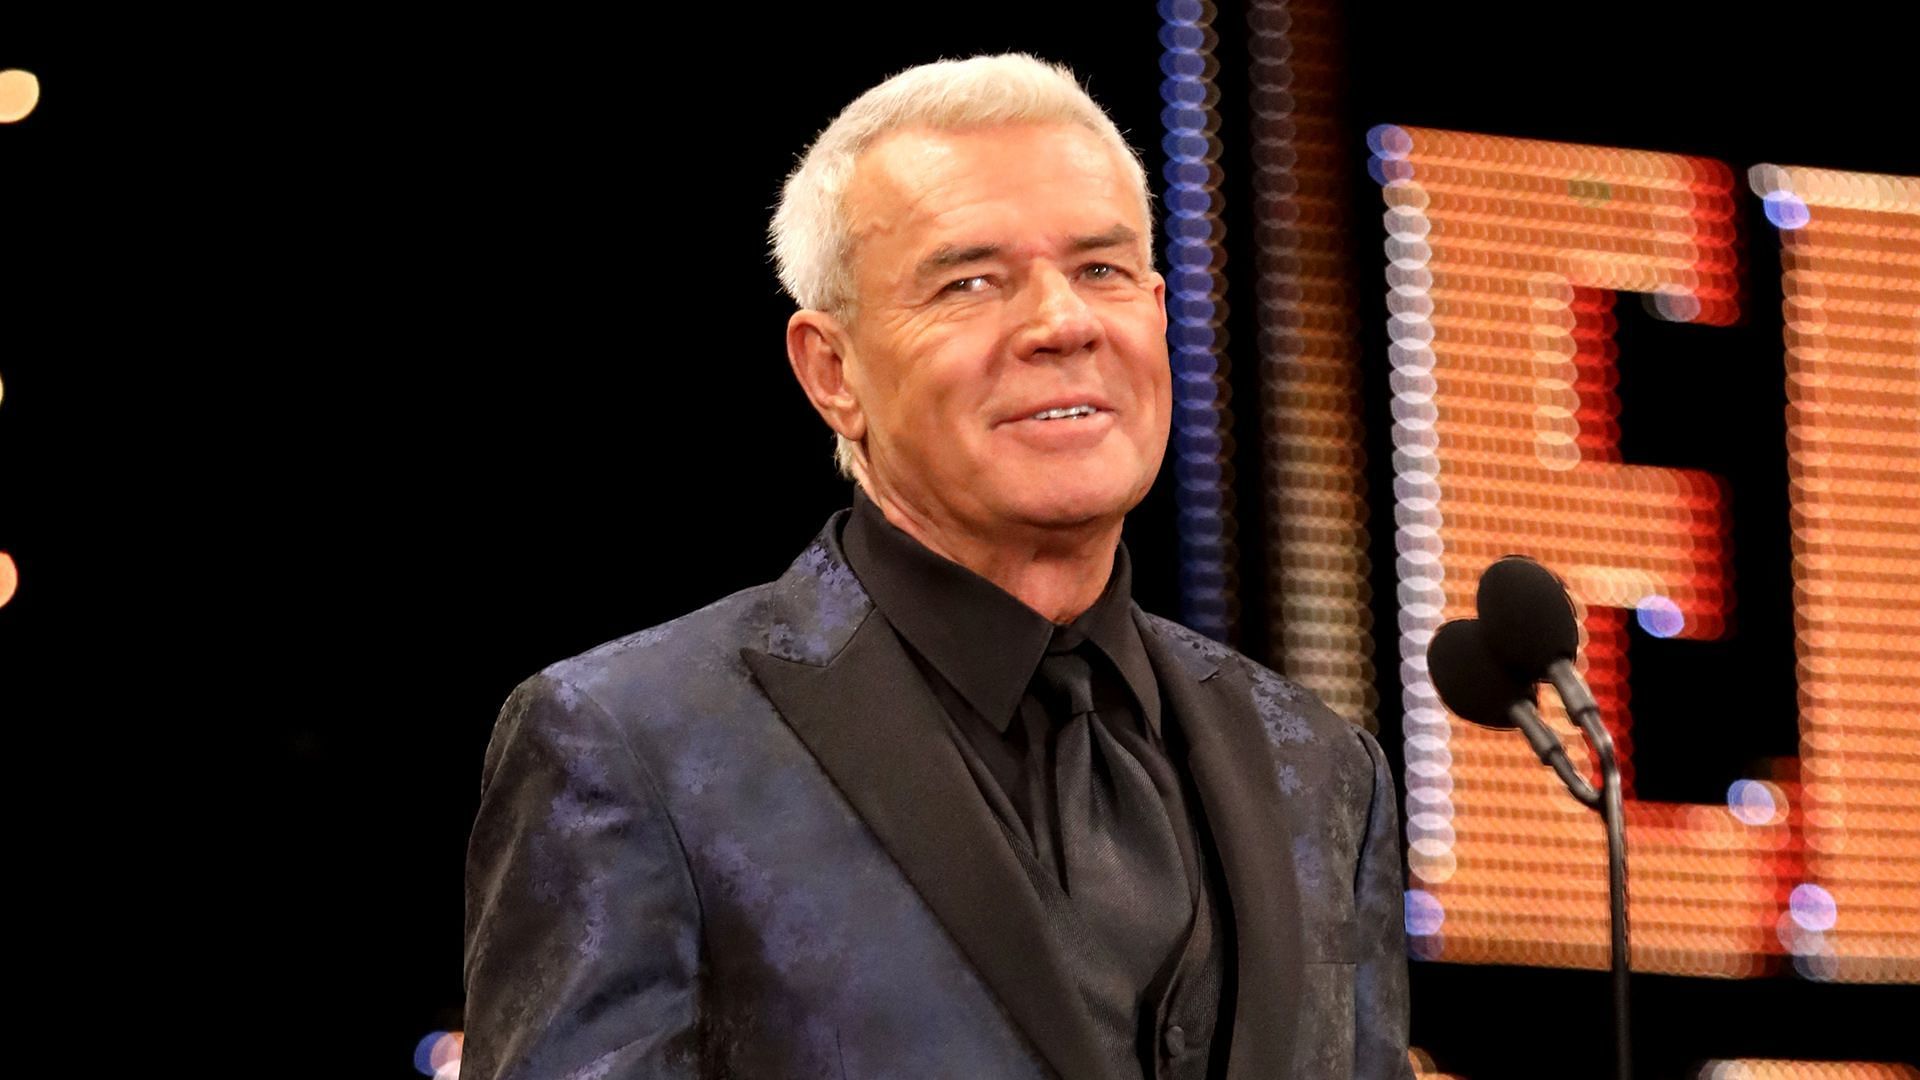 Eric Bischoff thought WWE legend Lex Luger was a jacka*s